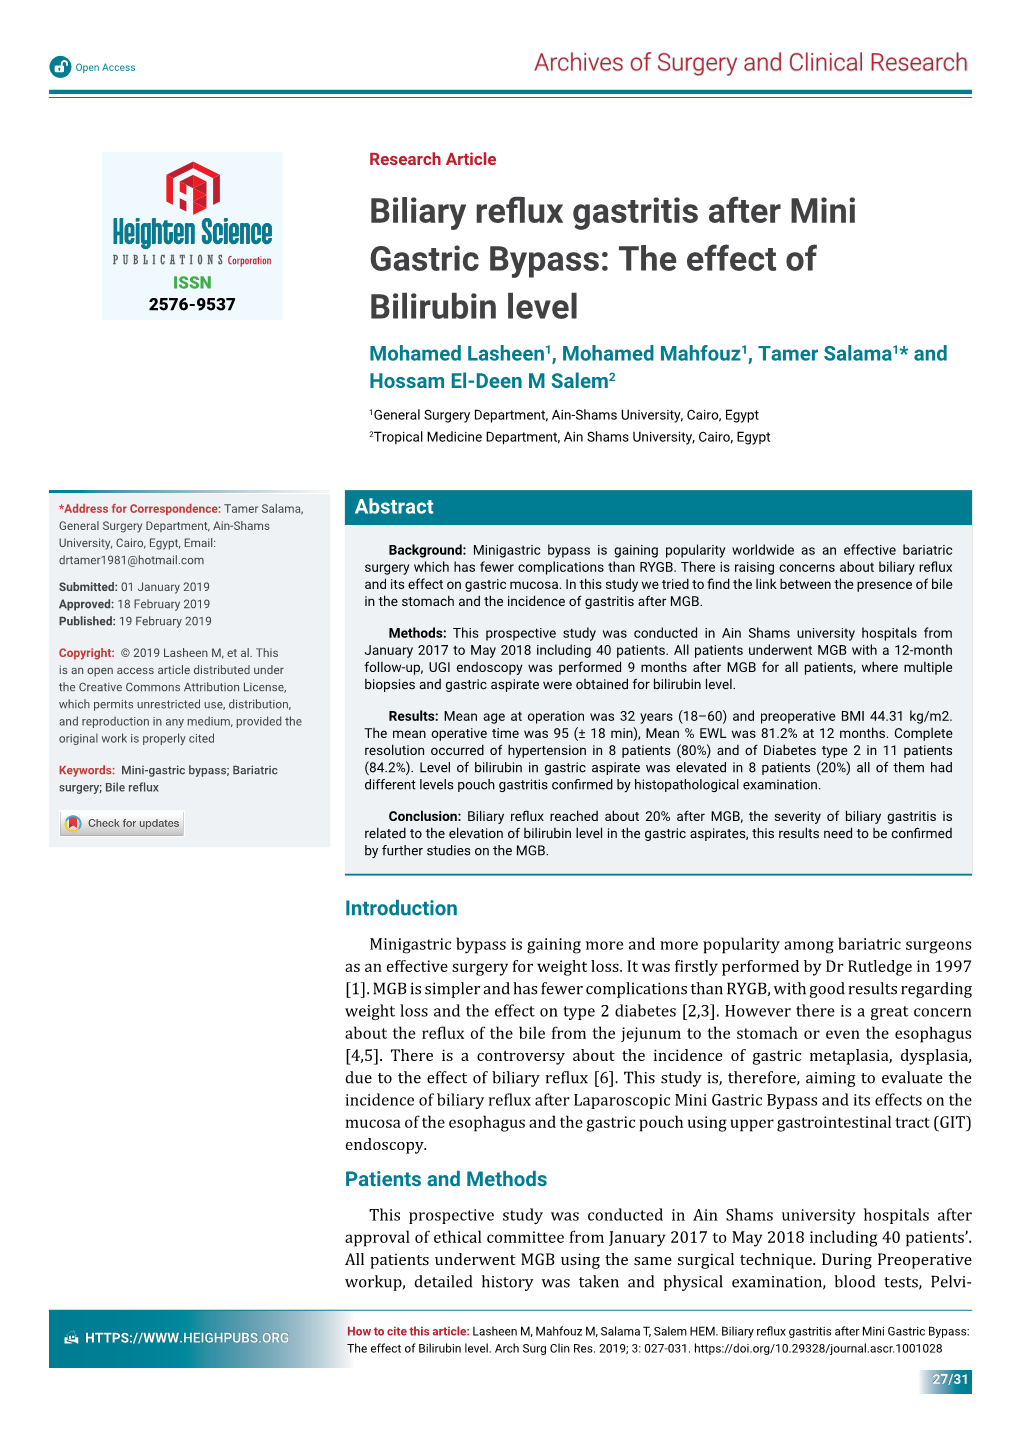 Biliary Reflux Gastritis After Mini Gastric Bypass: the Effect of Bilirubin Level